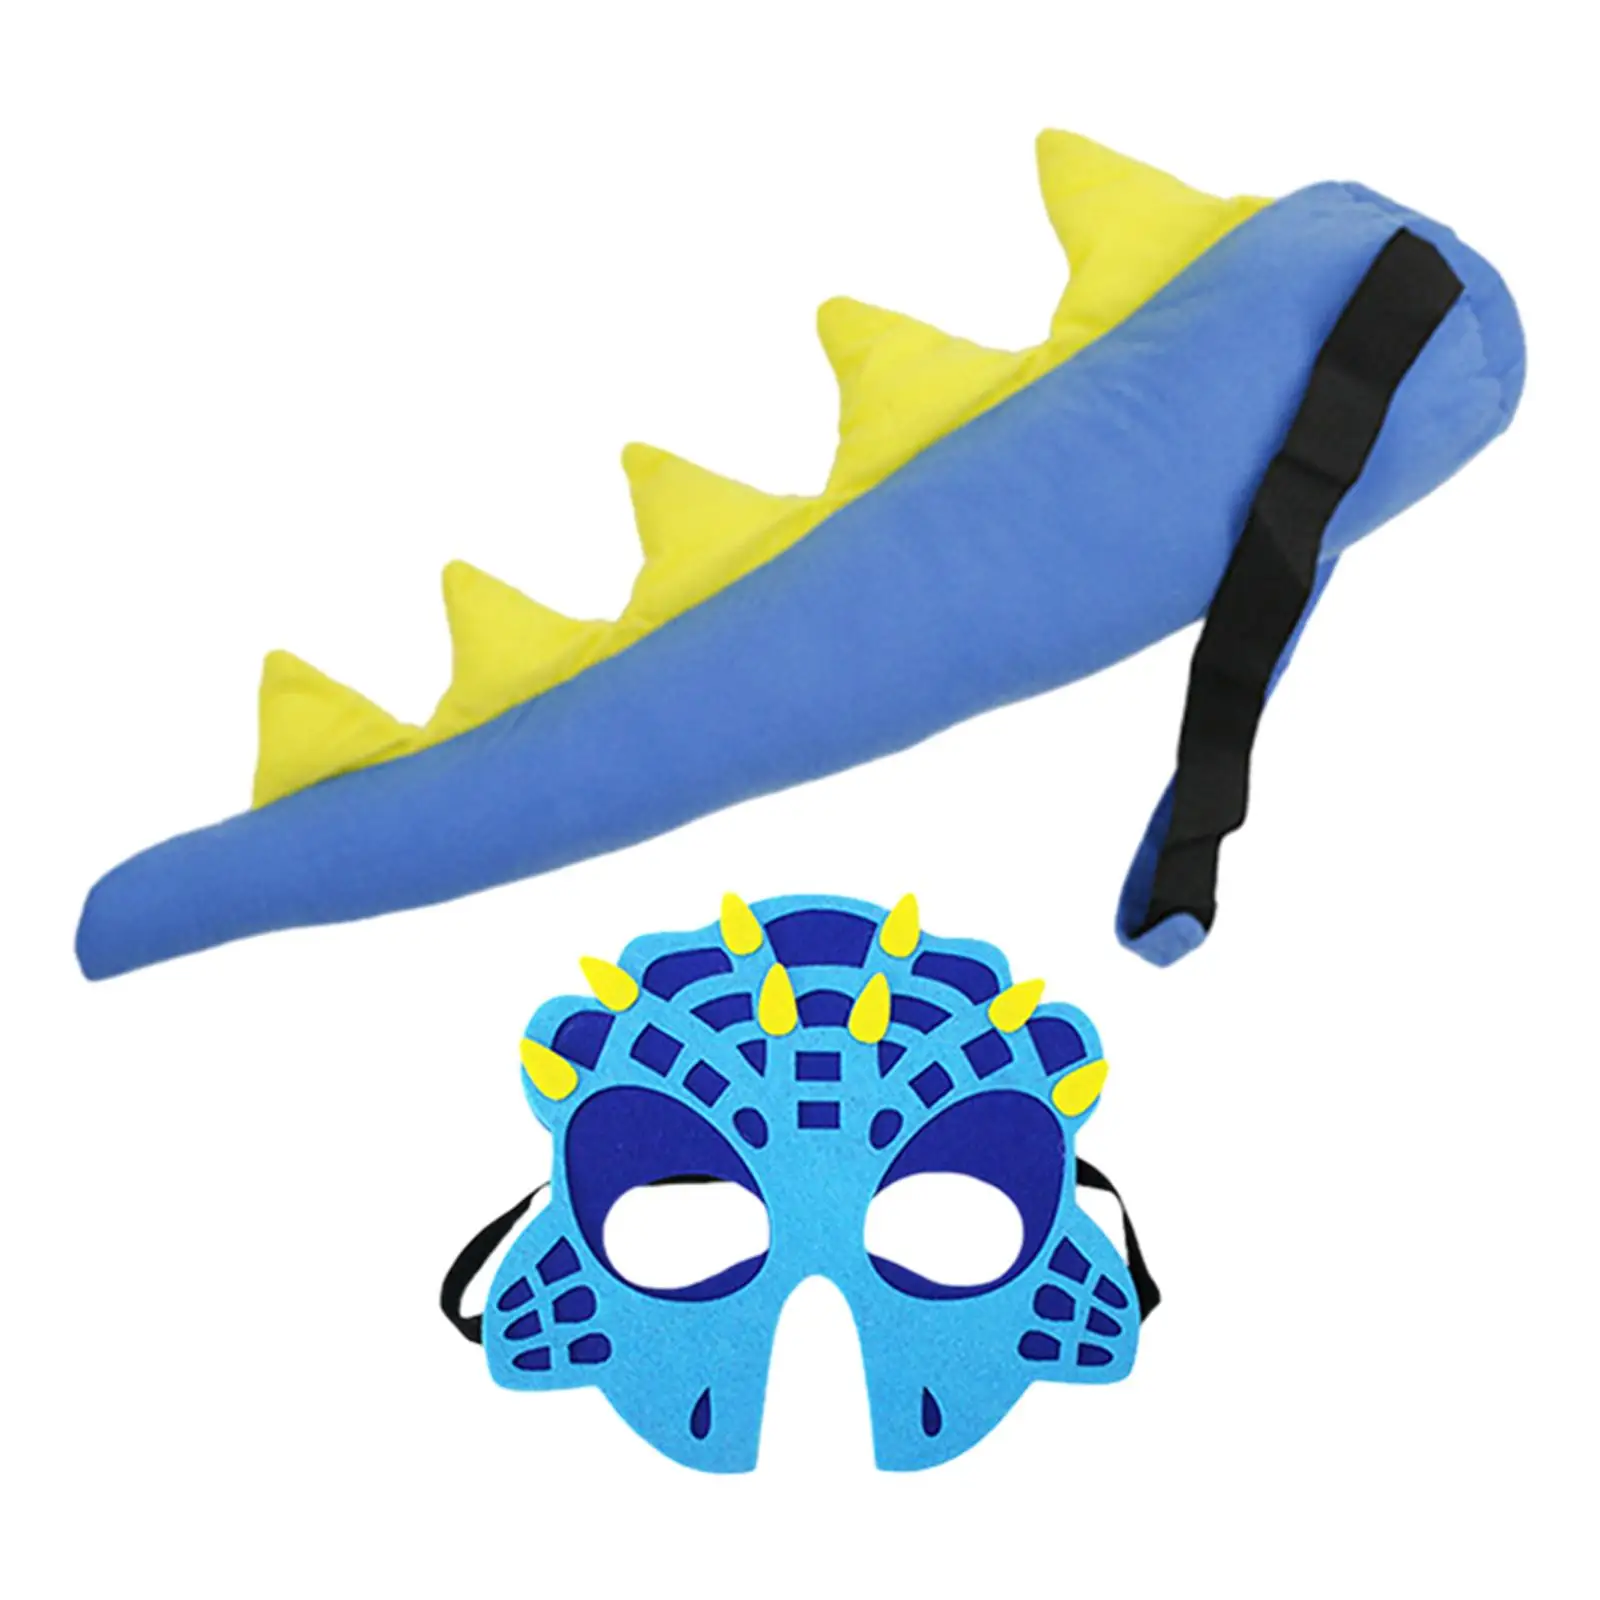 Dragon Costume for Kids Clothes Decoration Pretend Play Dinosaur Tail Mask Sets for Carnivals Festival Photo Props Easter